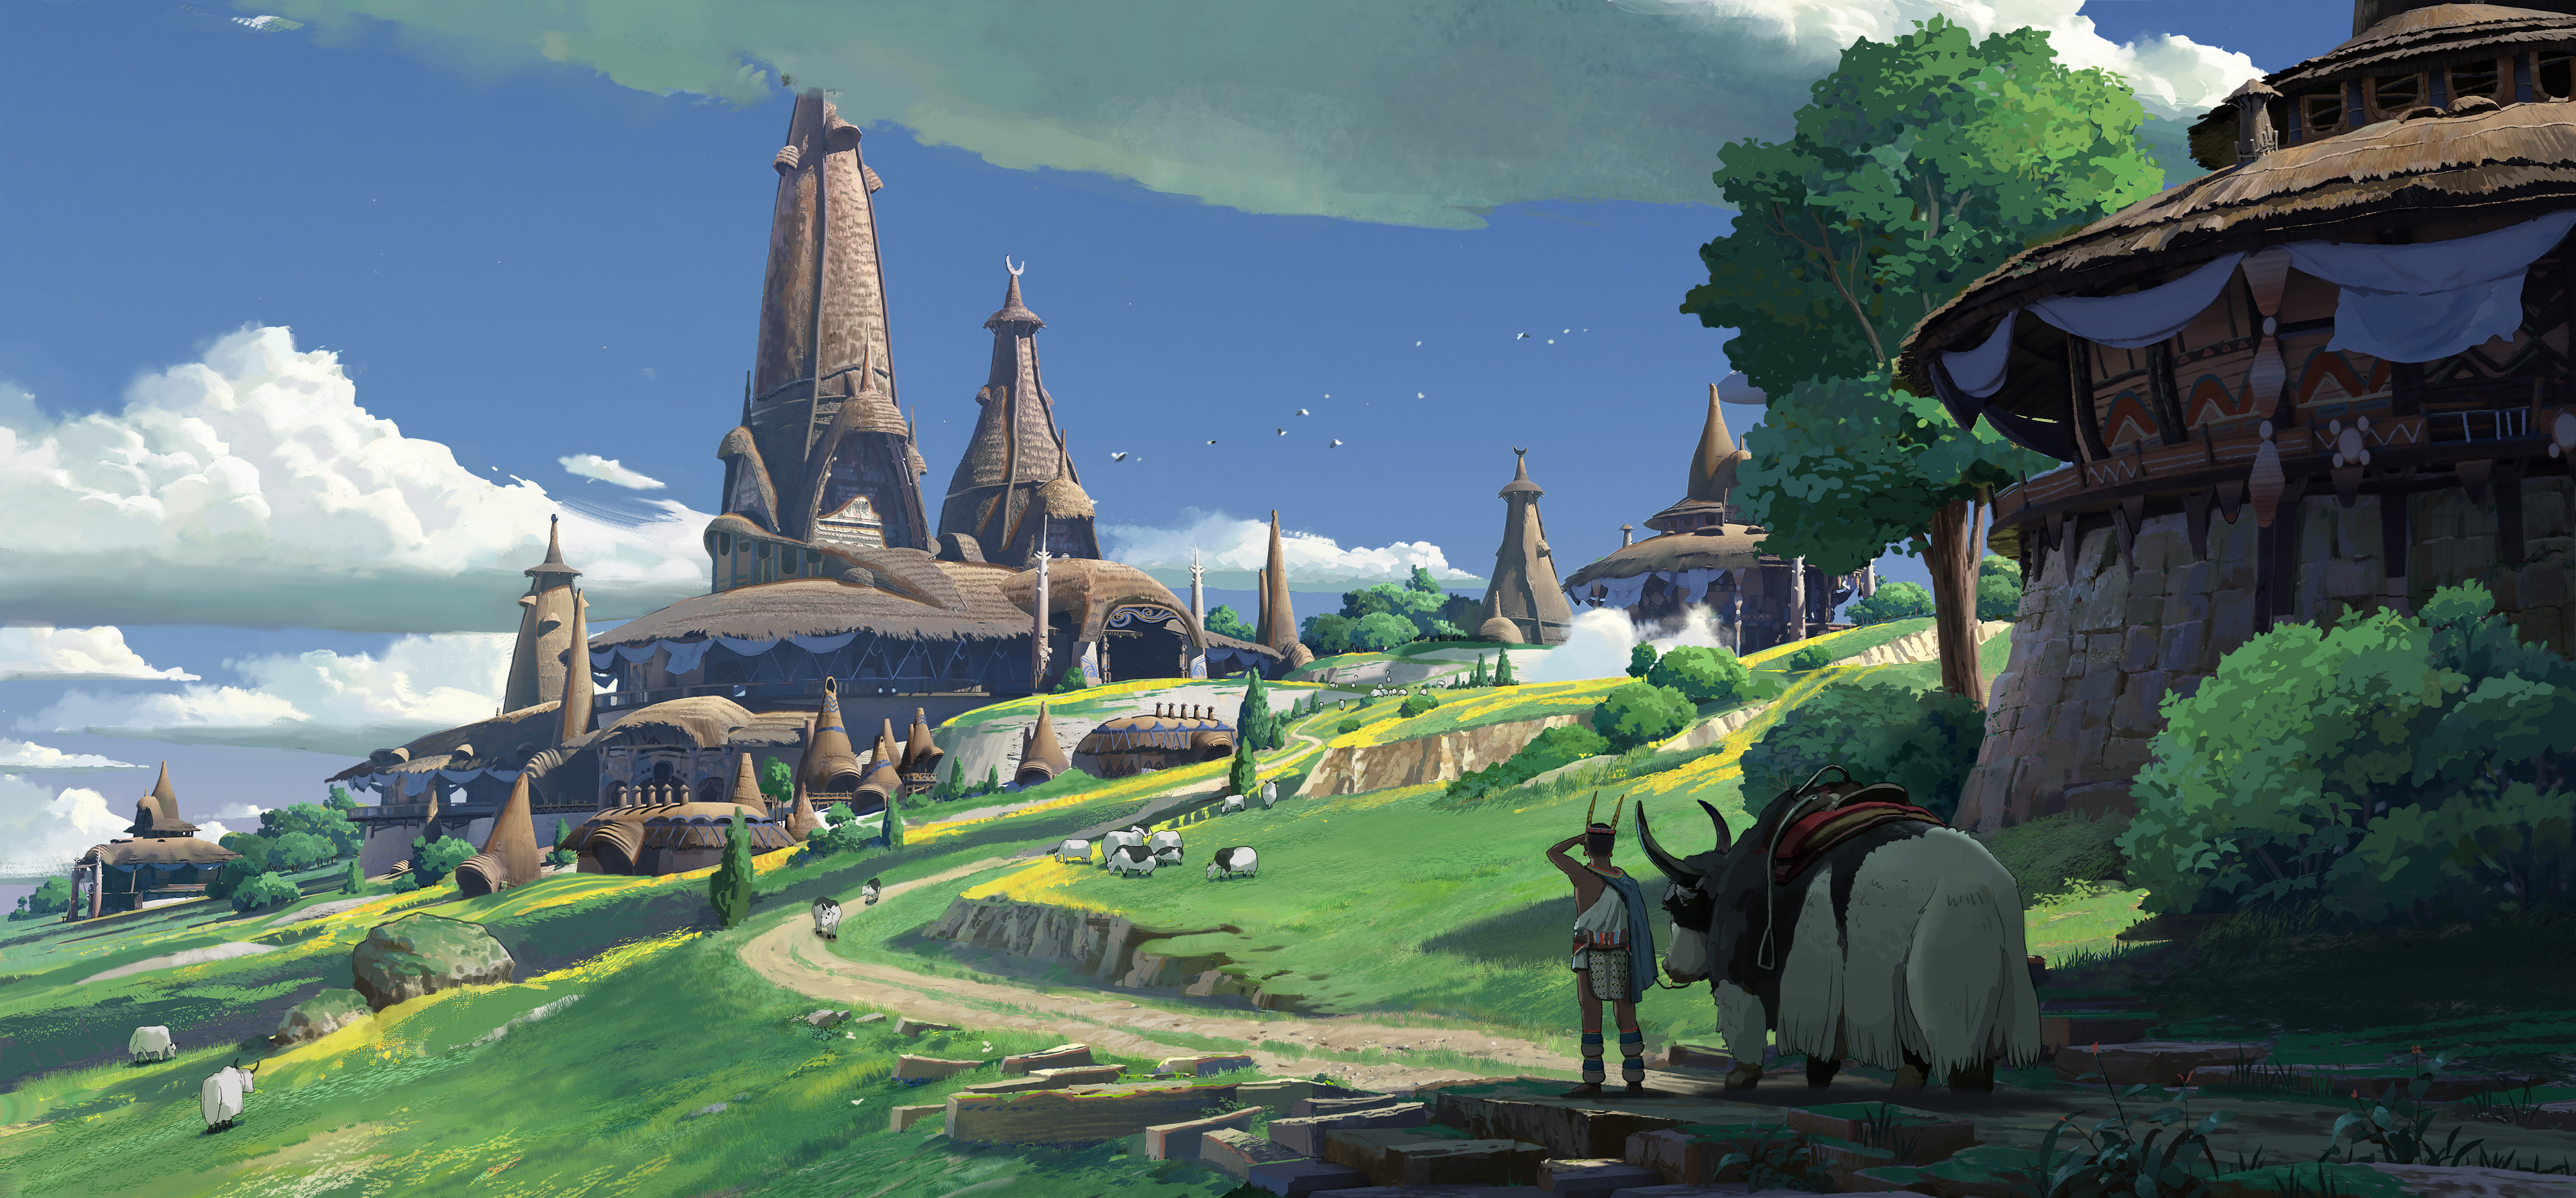 General 3840x1786 digital art concept art artwork town nature field house animals architecture building clouds trees environment